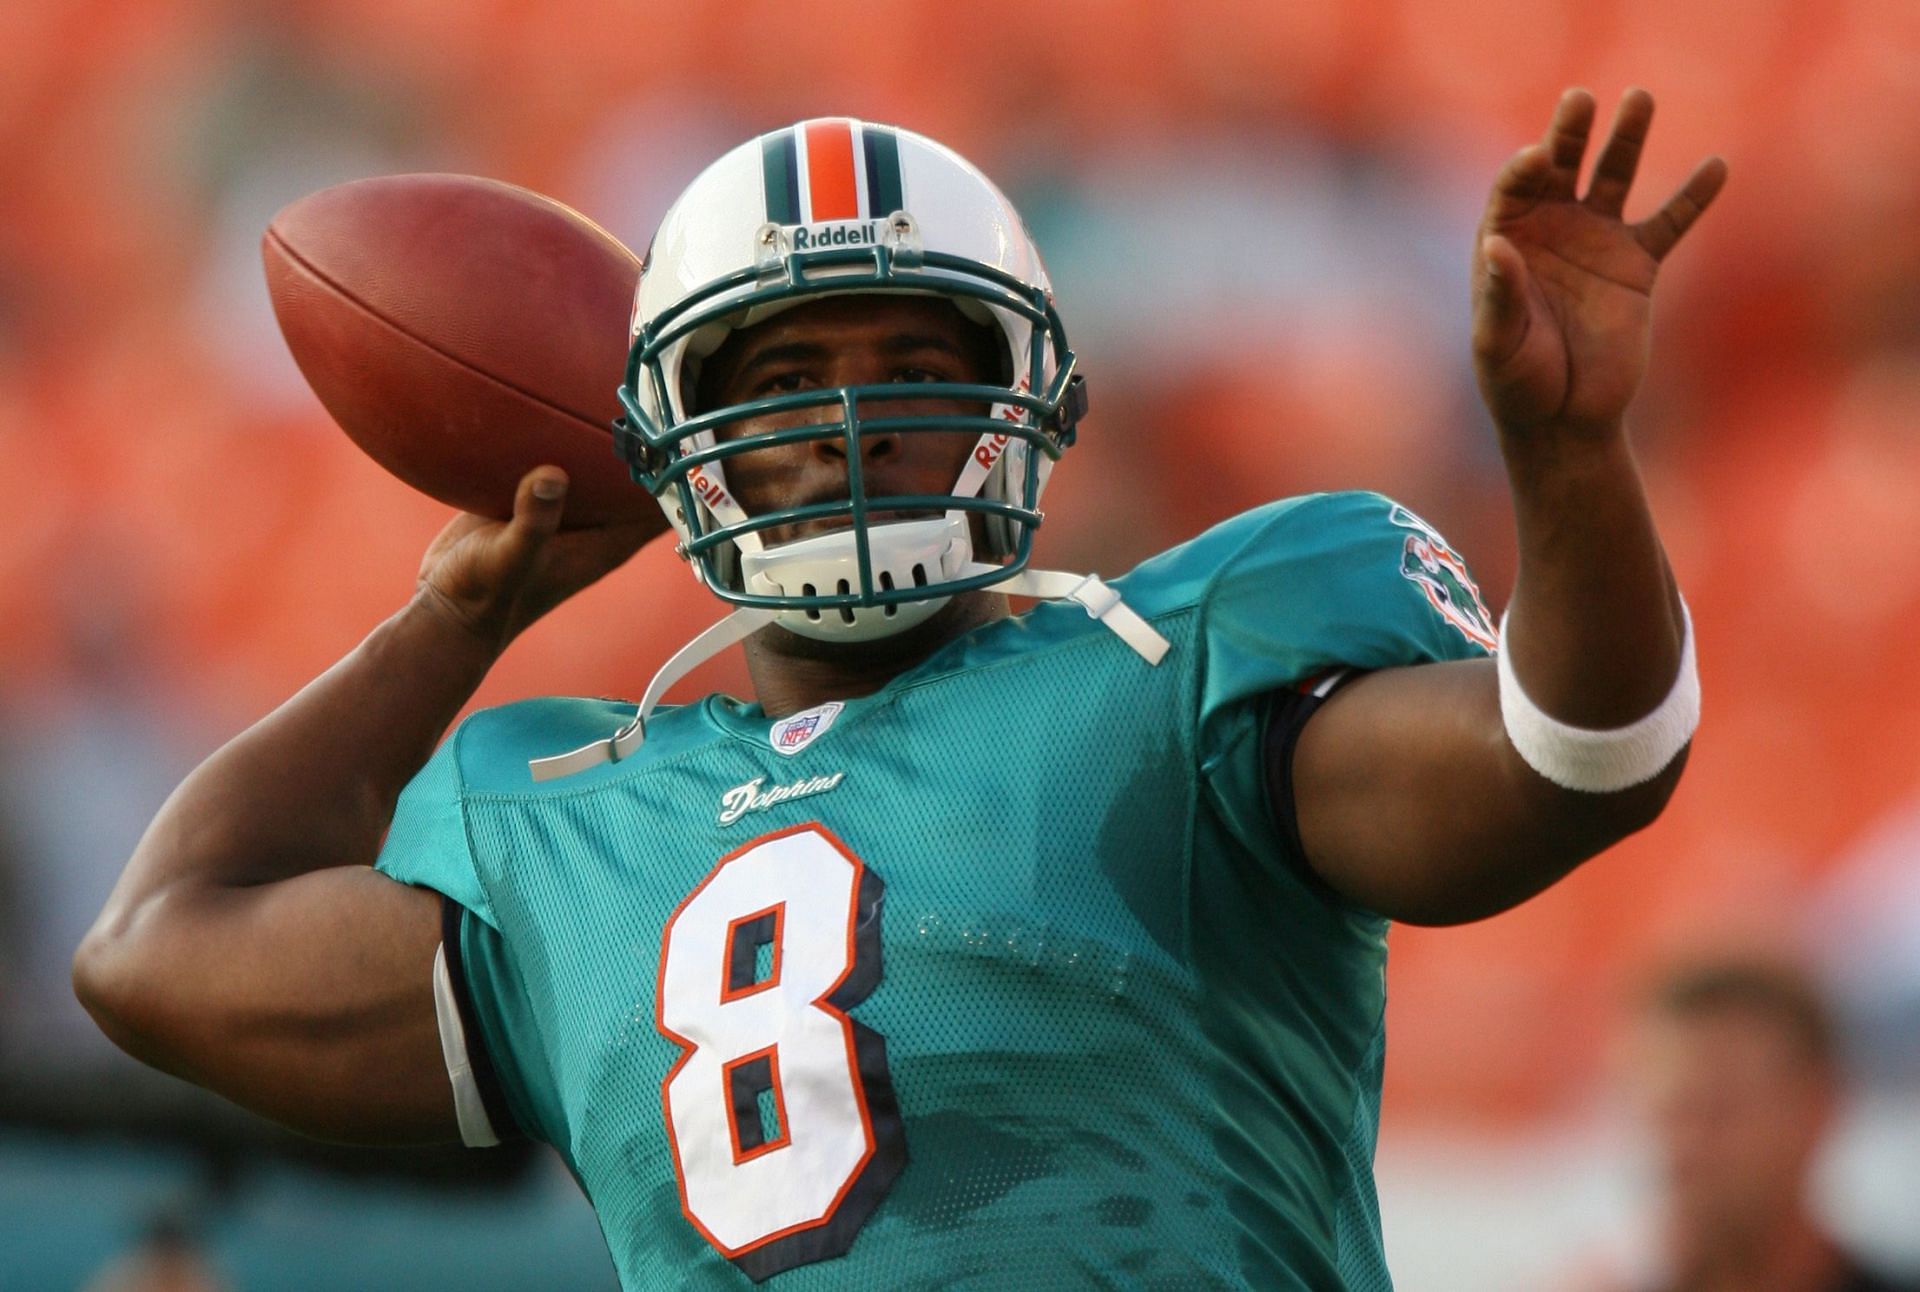 The Miami Dolphins&#039; decision to choose Daunte Culpepper over Drew Brees is one of the most impactful in NFL history